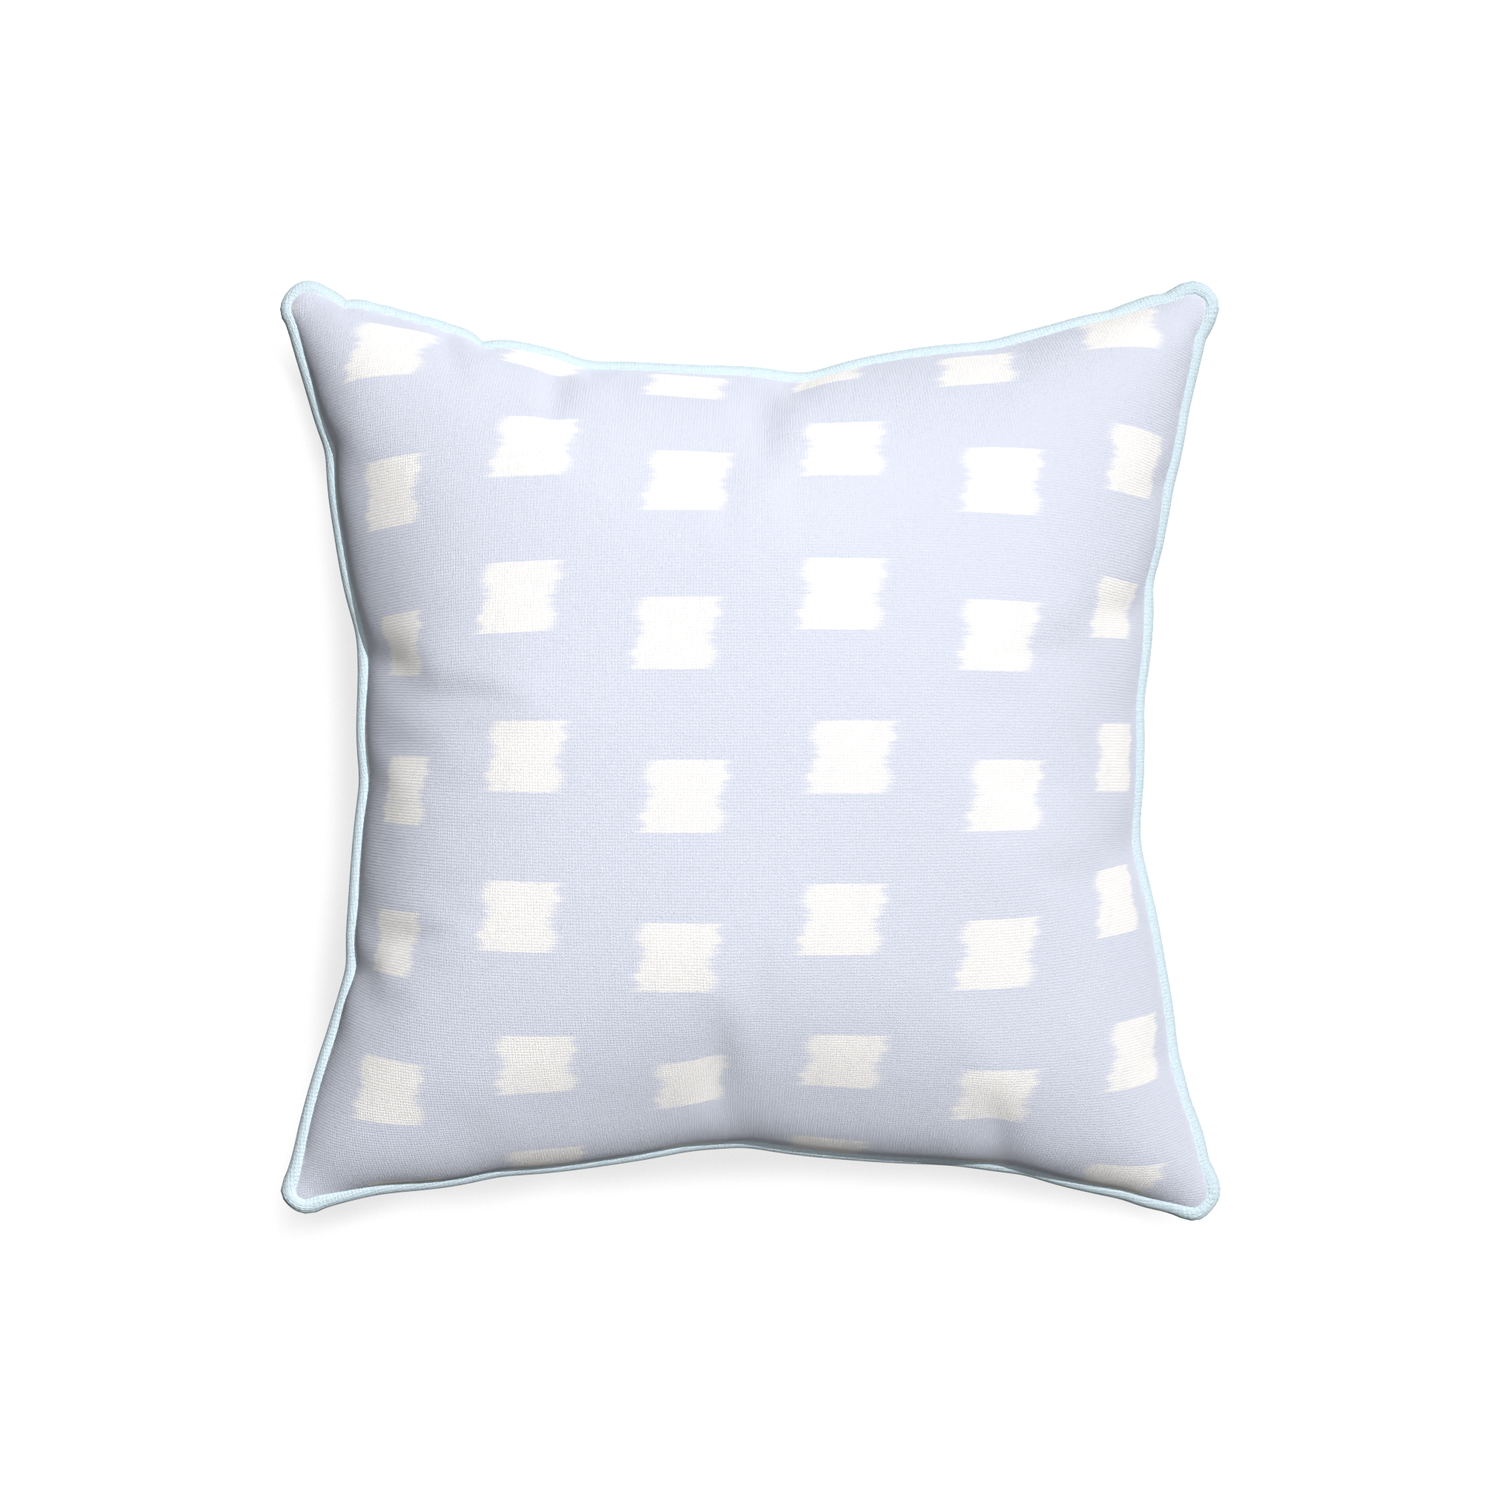 20-square denton custom pillow with powder piping on white background